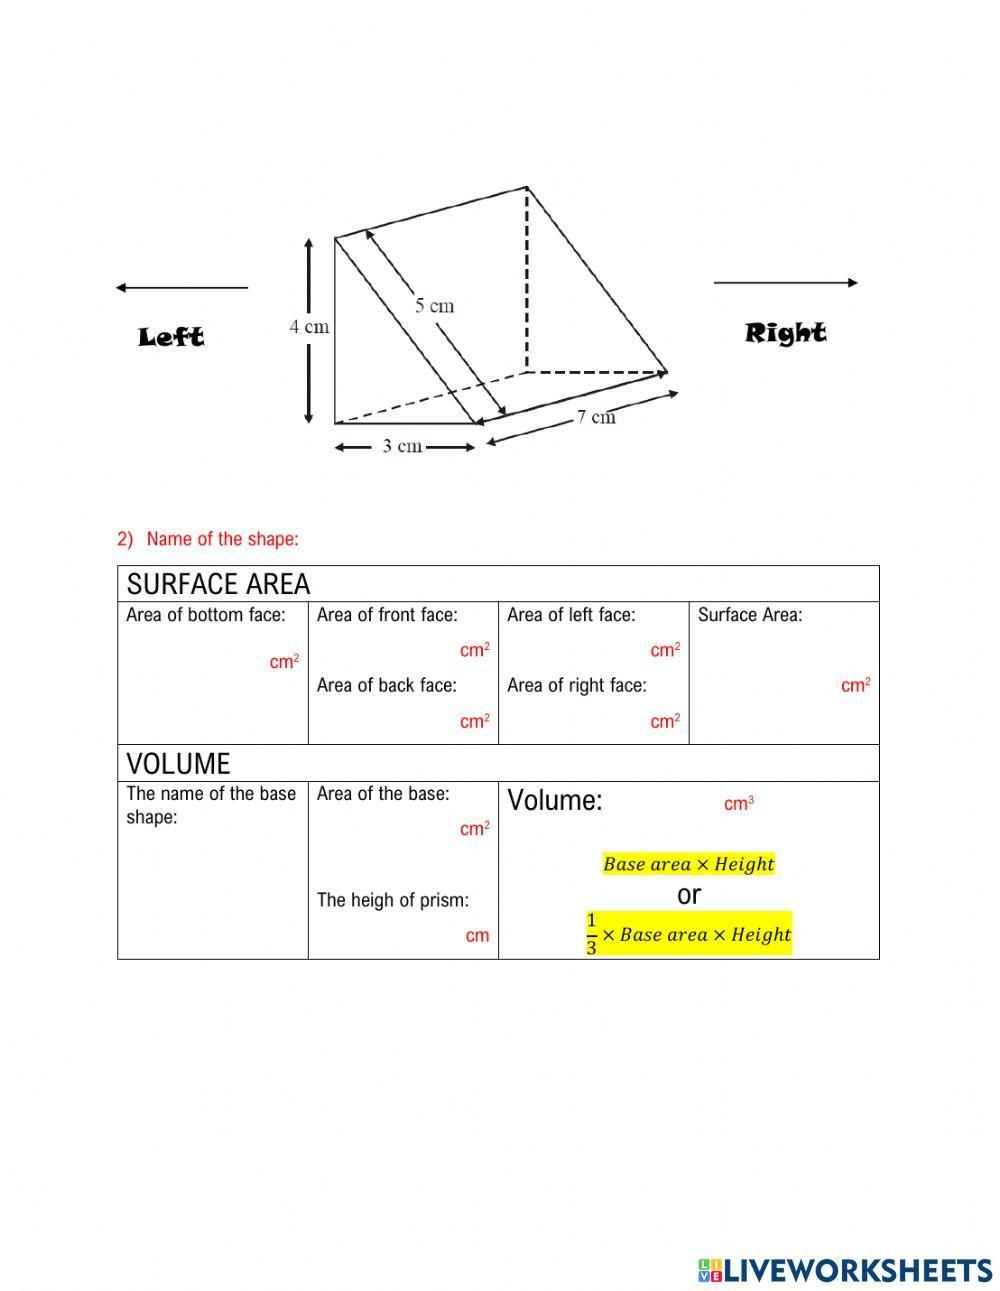 Volume and Surface Area of 3D Shapes